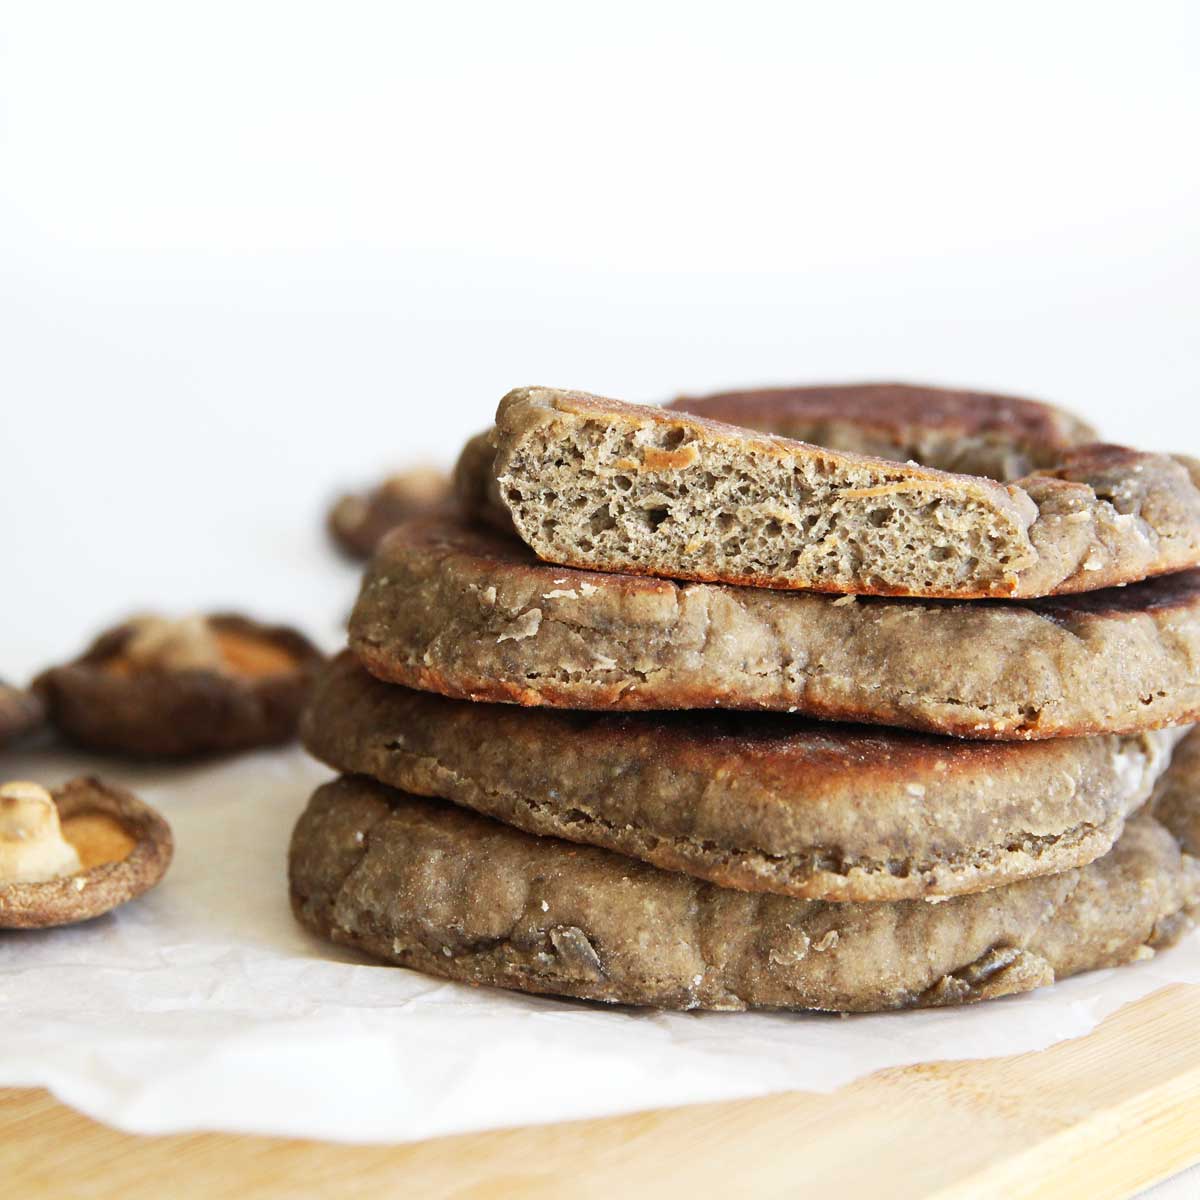 Quick & Simple Mushroom Flatbread (Naan) Made in the Food Processor - Pumpkin Chocolate Frosting